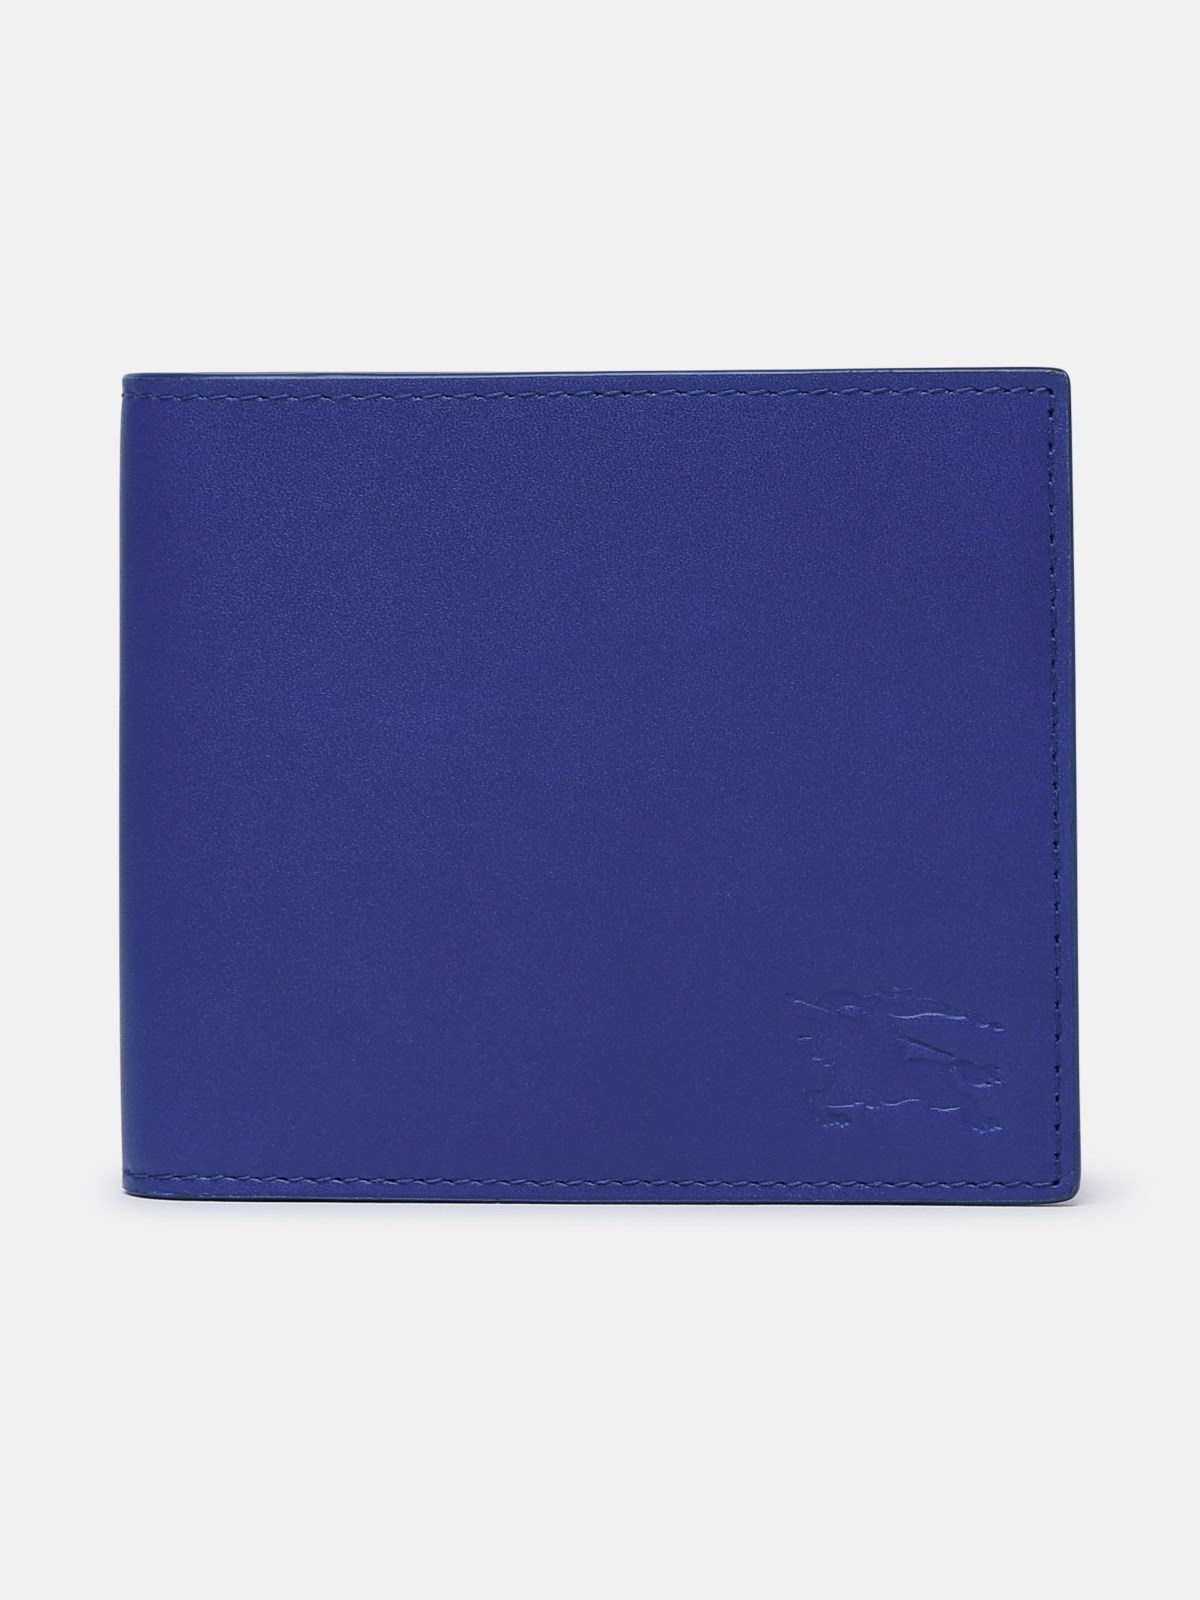 BLUE CALF LEATHER WALLET - 1